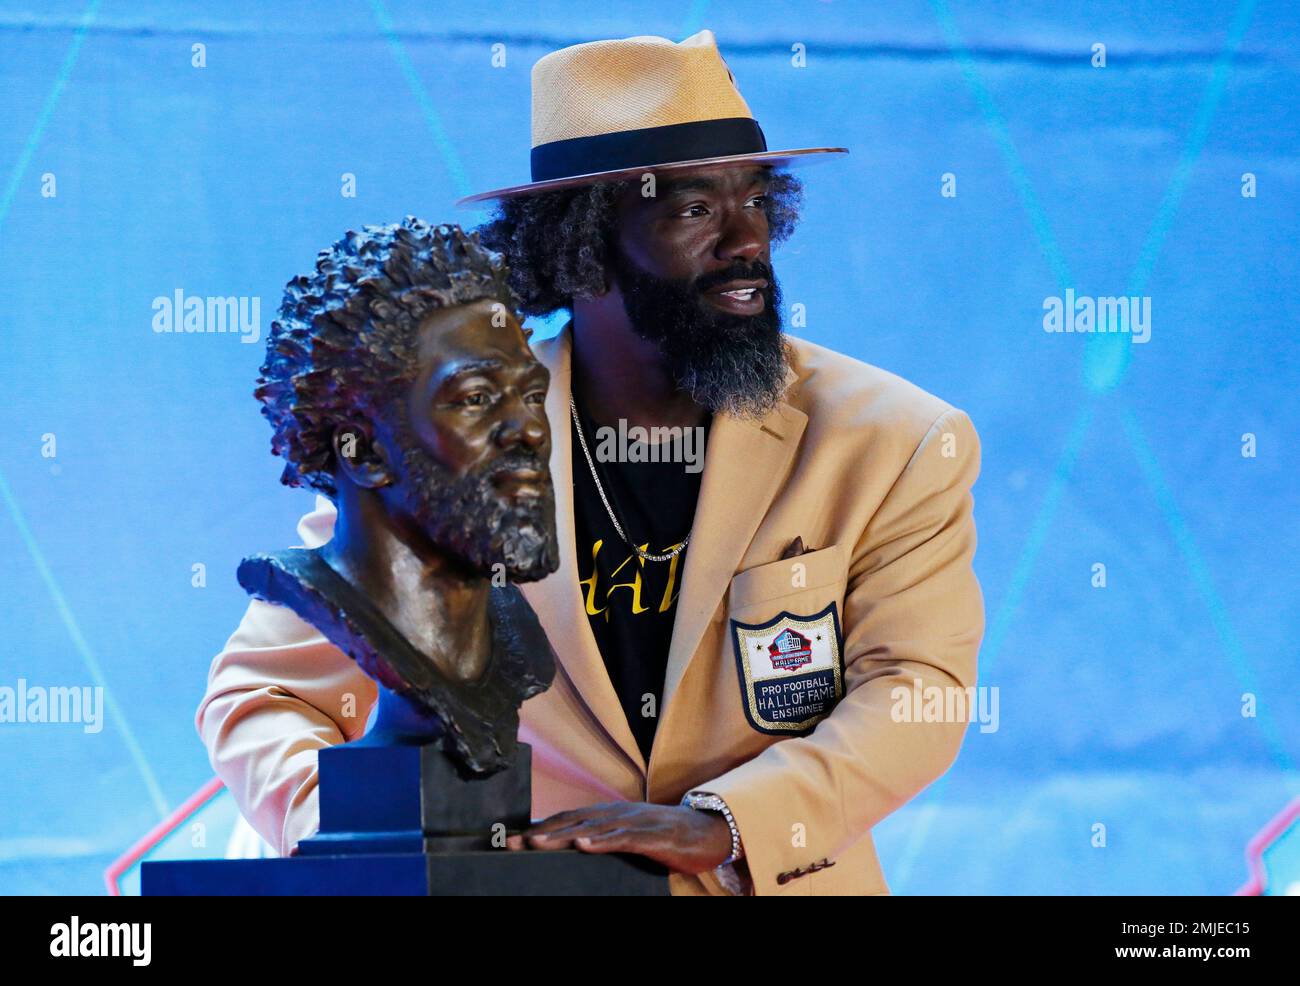 ed reed bust